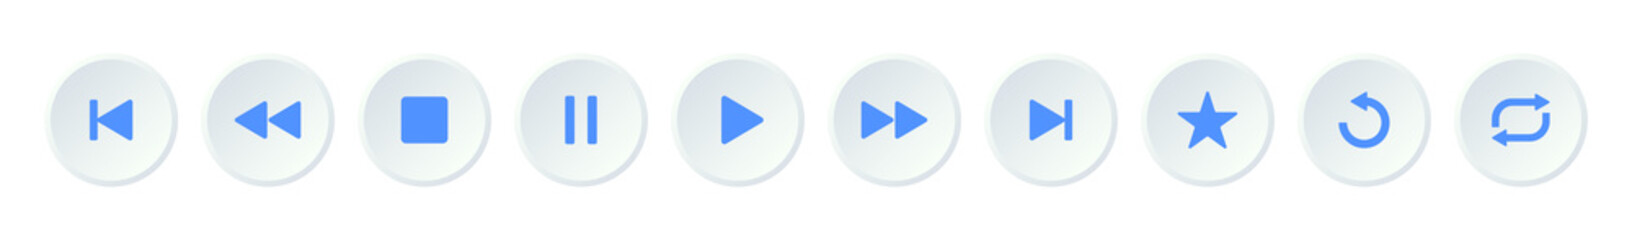 Media player icon set. Blue color symbols, repeat icons. UI vector buttons. User interface elements for mobile app